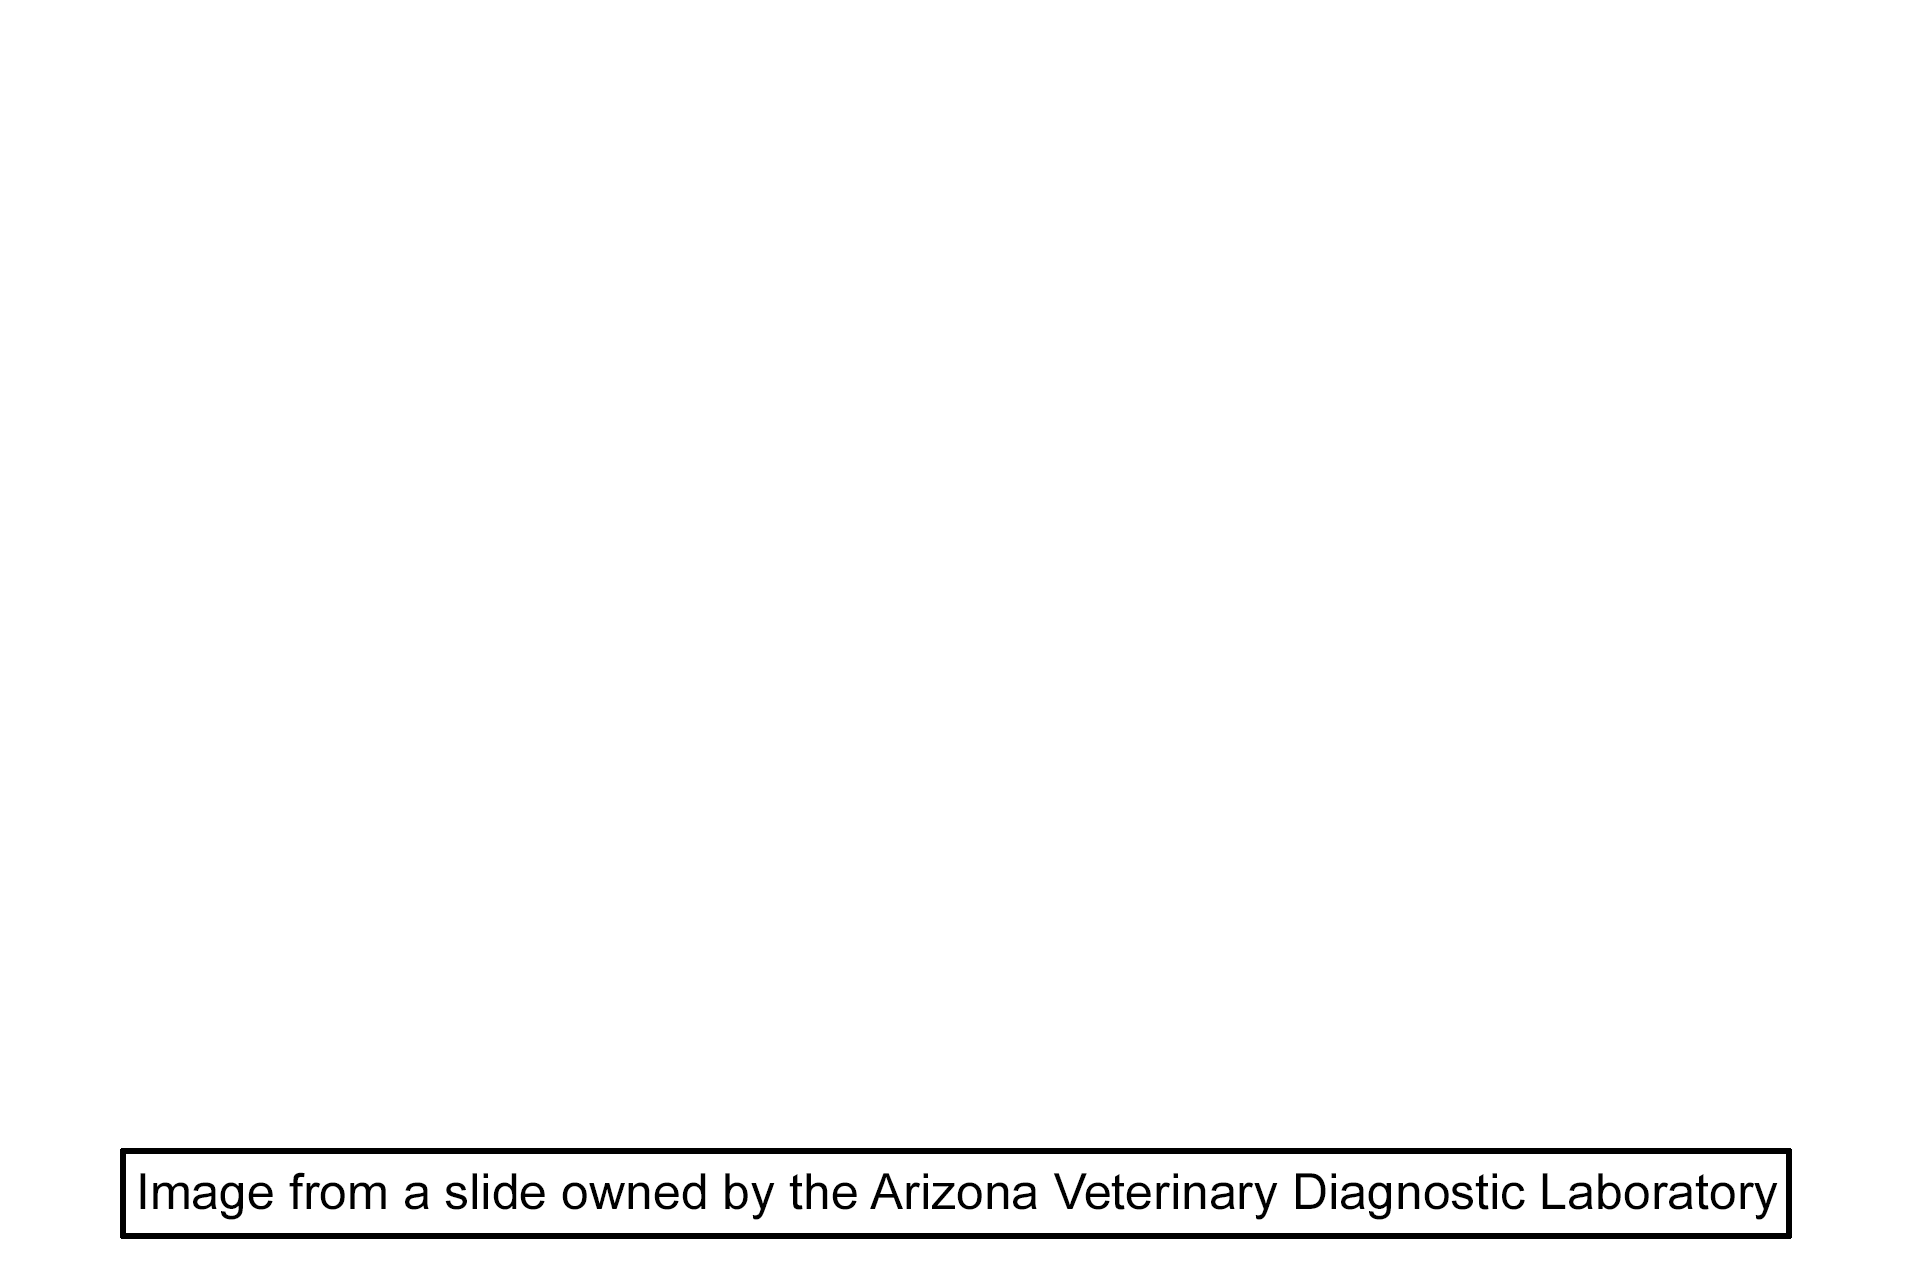 Image source > <p>Image taken of a slide owned by the Arizona Veterinary Diagnostic Laboratory.</p>
